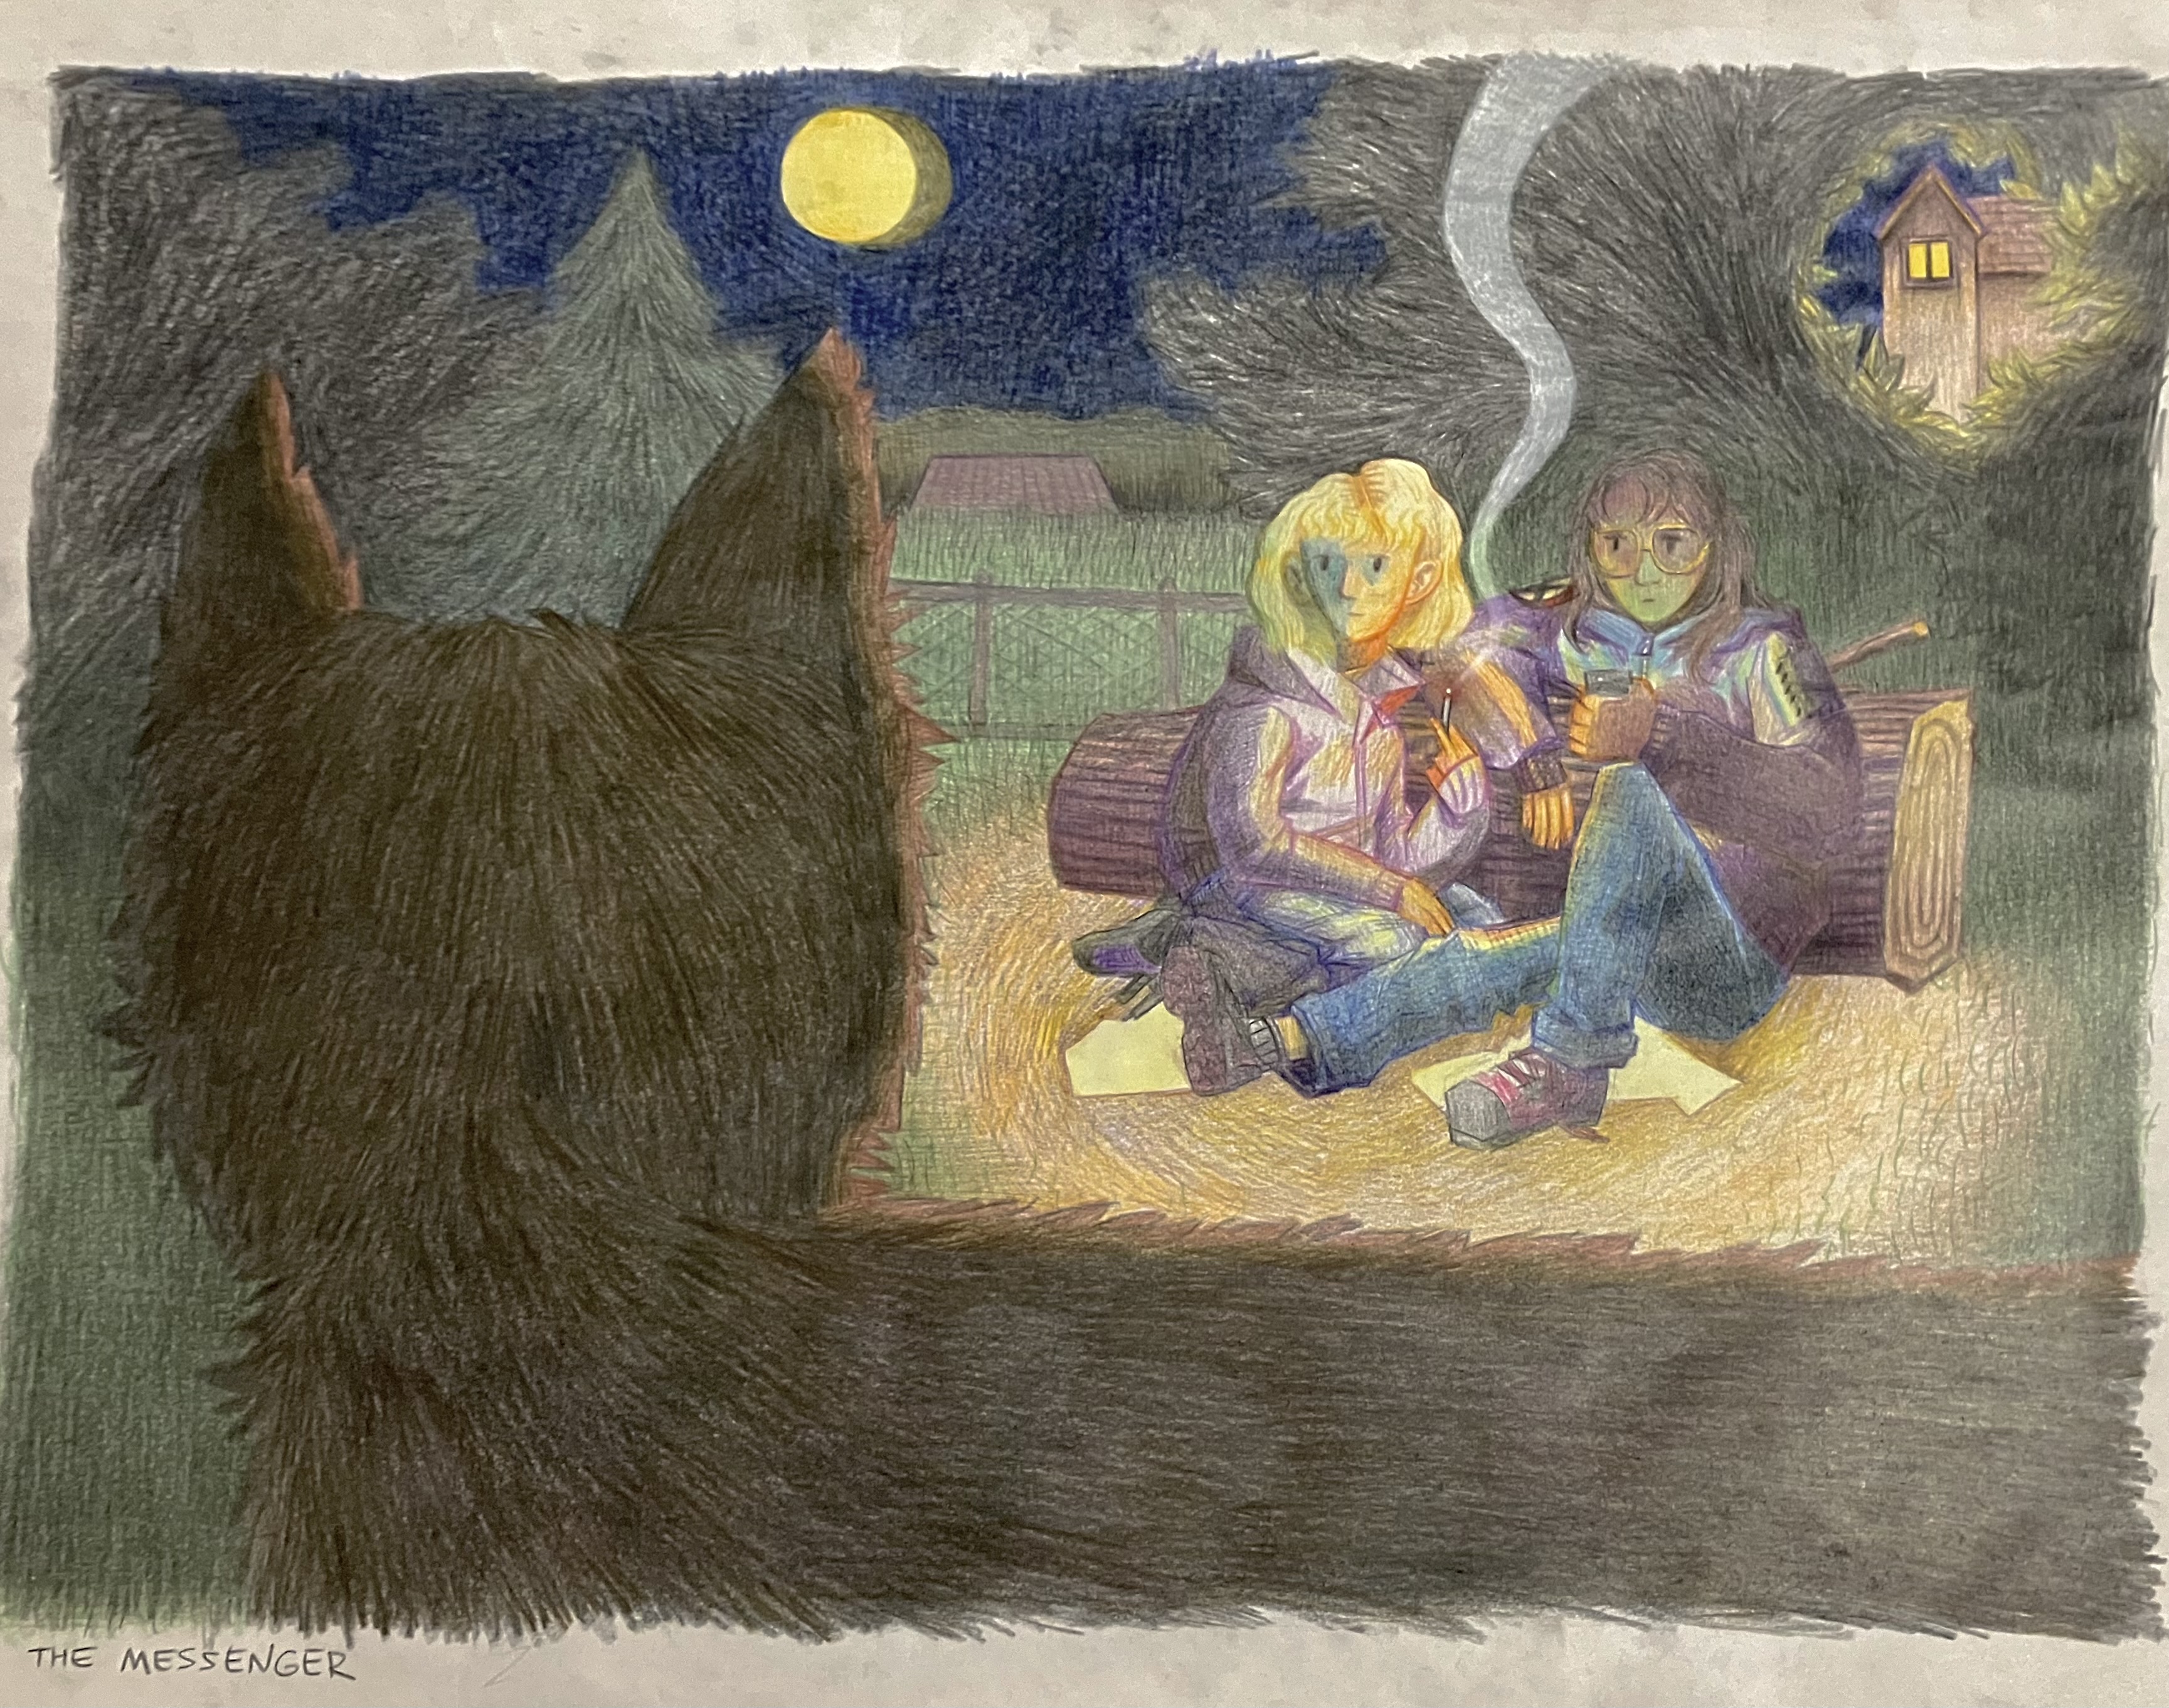 A colored pencil drawing of two people sitting against a log in the middle of the woods at night. One is holding a lit blunt and the other is holding a cell phone. They're making eye contact with a black cat. There are houses in the distance and a bright yellow moon that casts a spotlight on the figures.